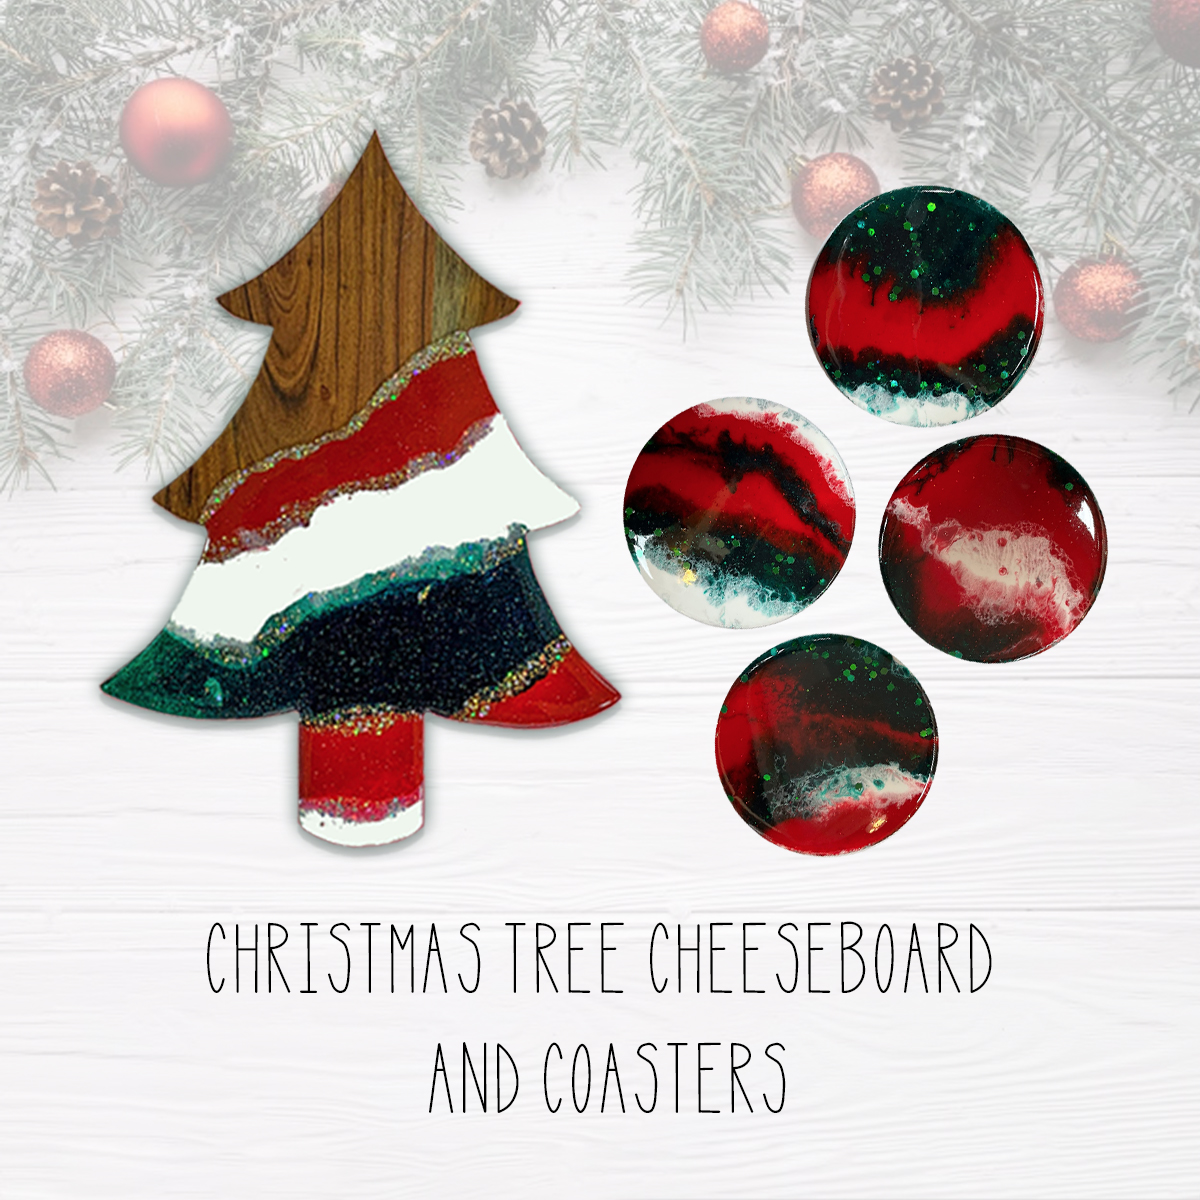 zChristmas Edition Create n Sip - Resin Art on Christmas Tree Cheeseboard with 4 coasters